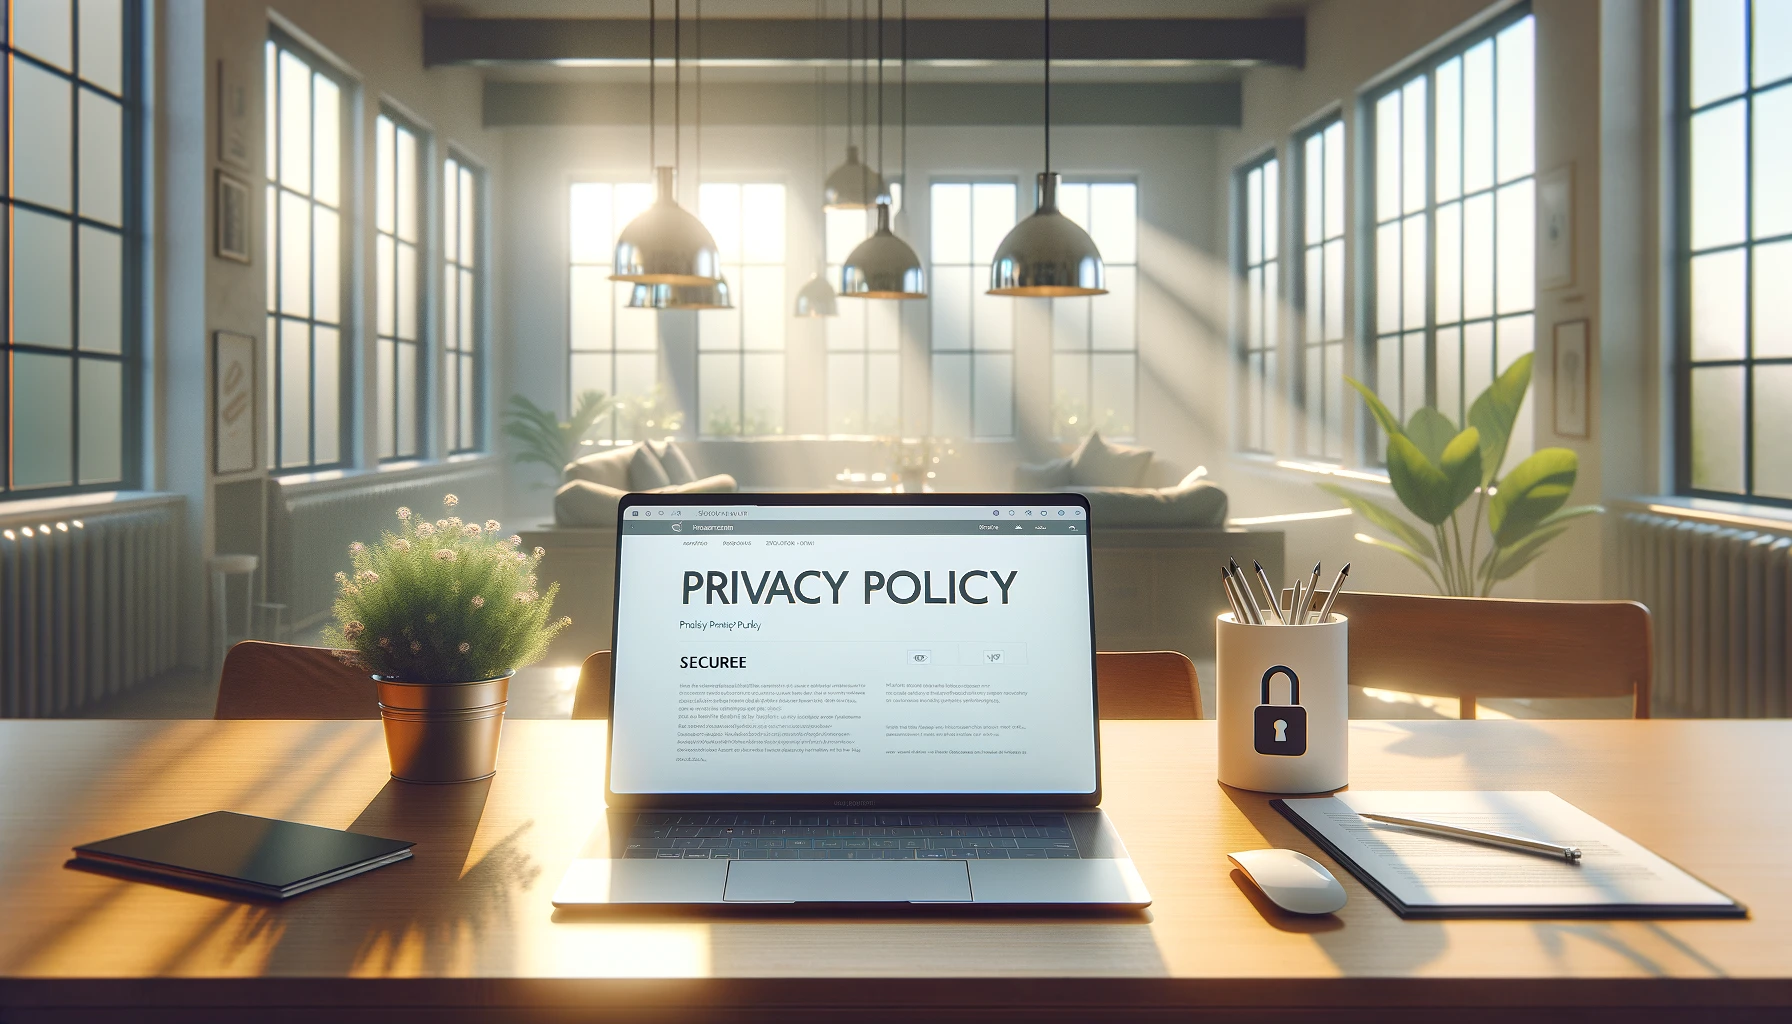 UK Website Privacy Policy Template